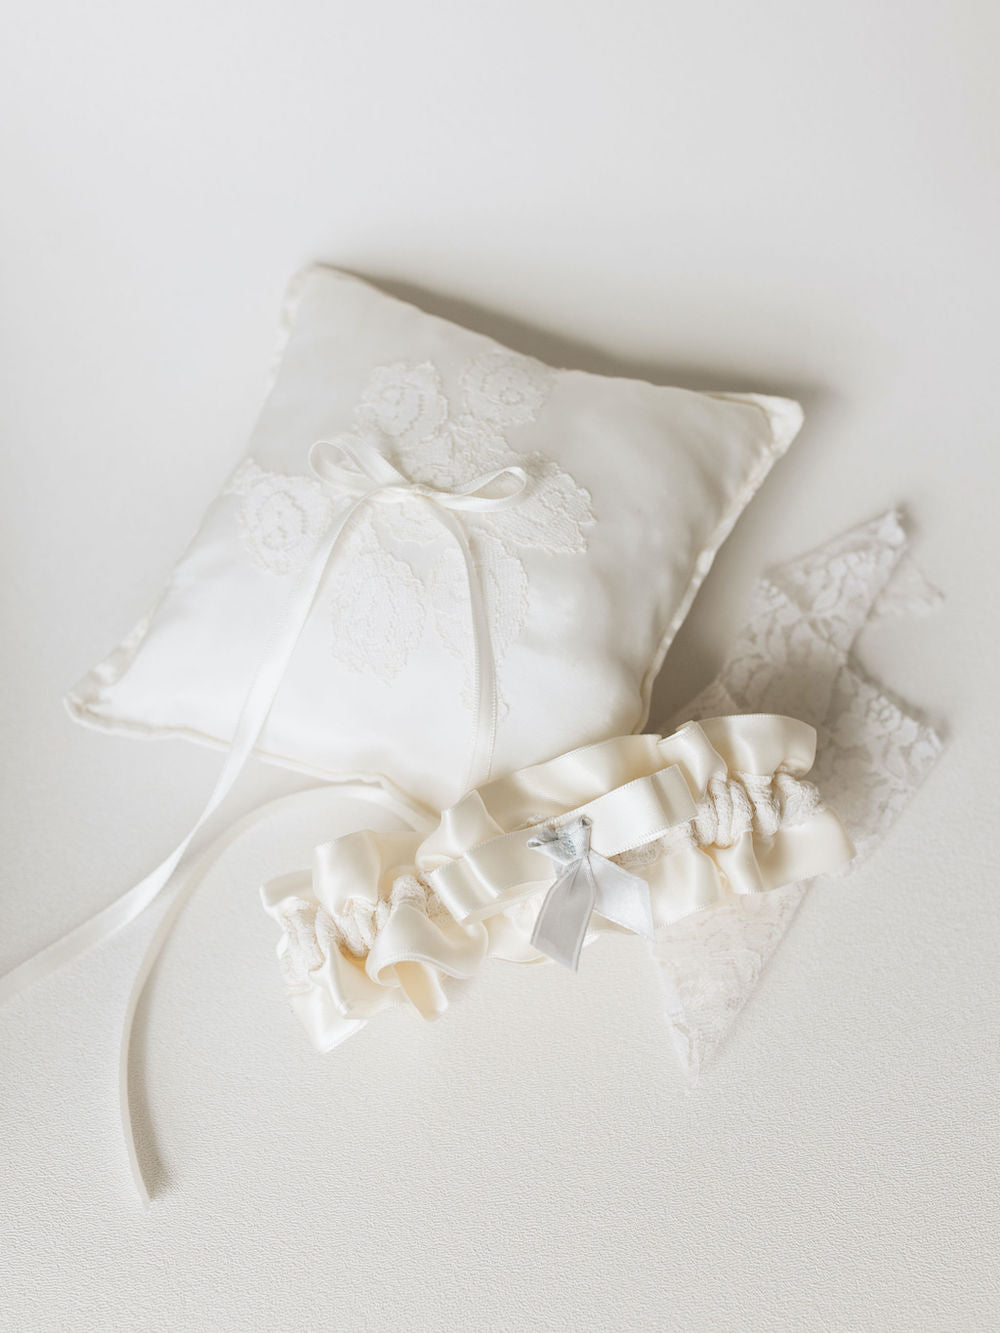 wedding garter and ring pillow handmade from bride's mother's wedding lace purse pouch - handmade heirloom bridal accessories by The Garter Girl